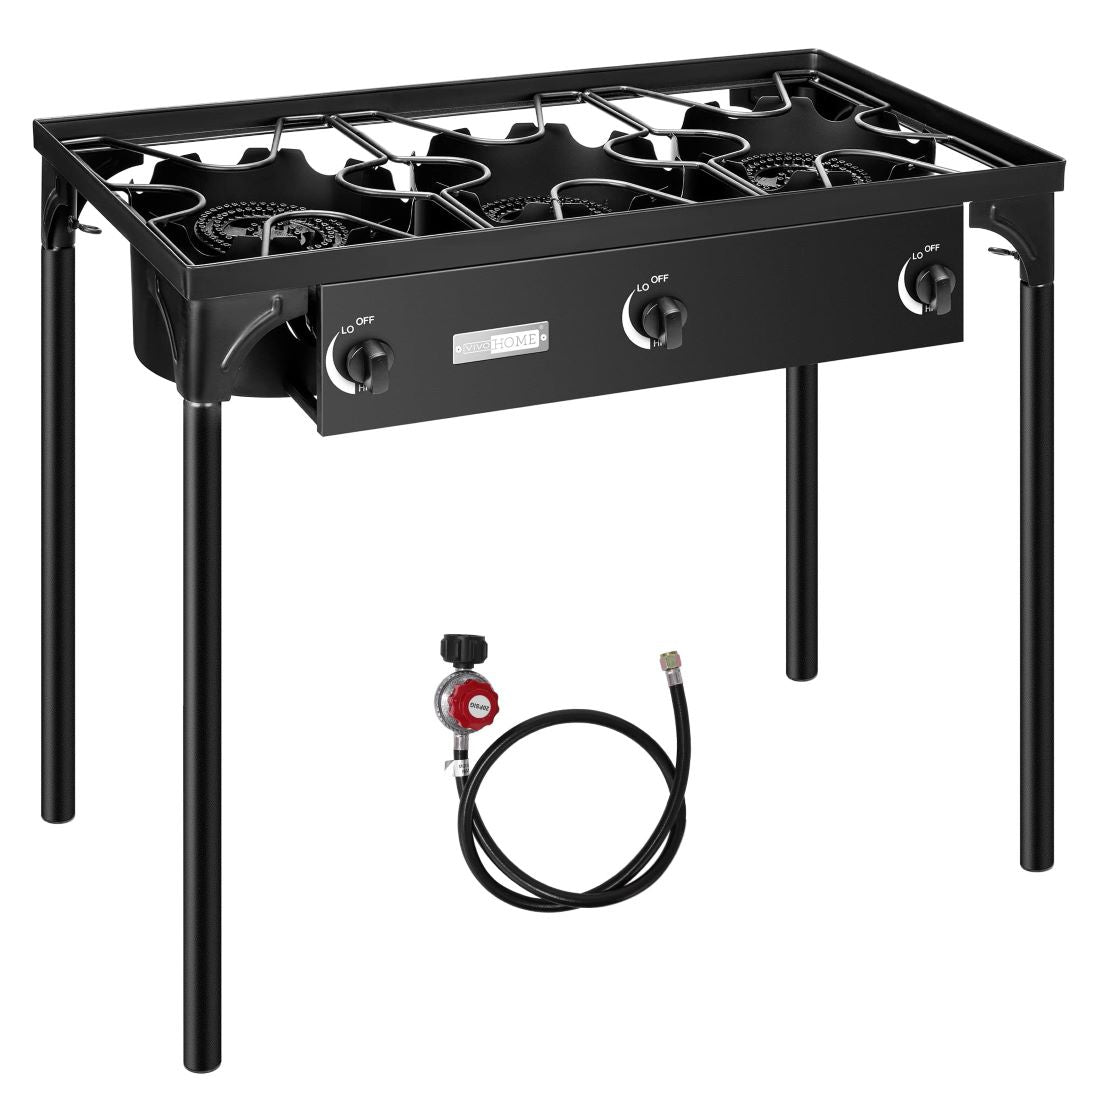 VIVOHOME Outdoor Kitchen Grill Cooker for Camping